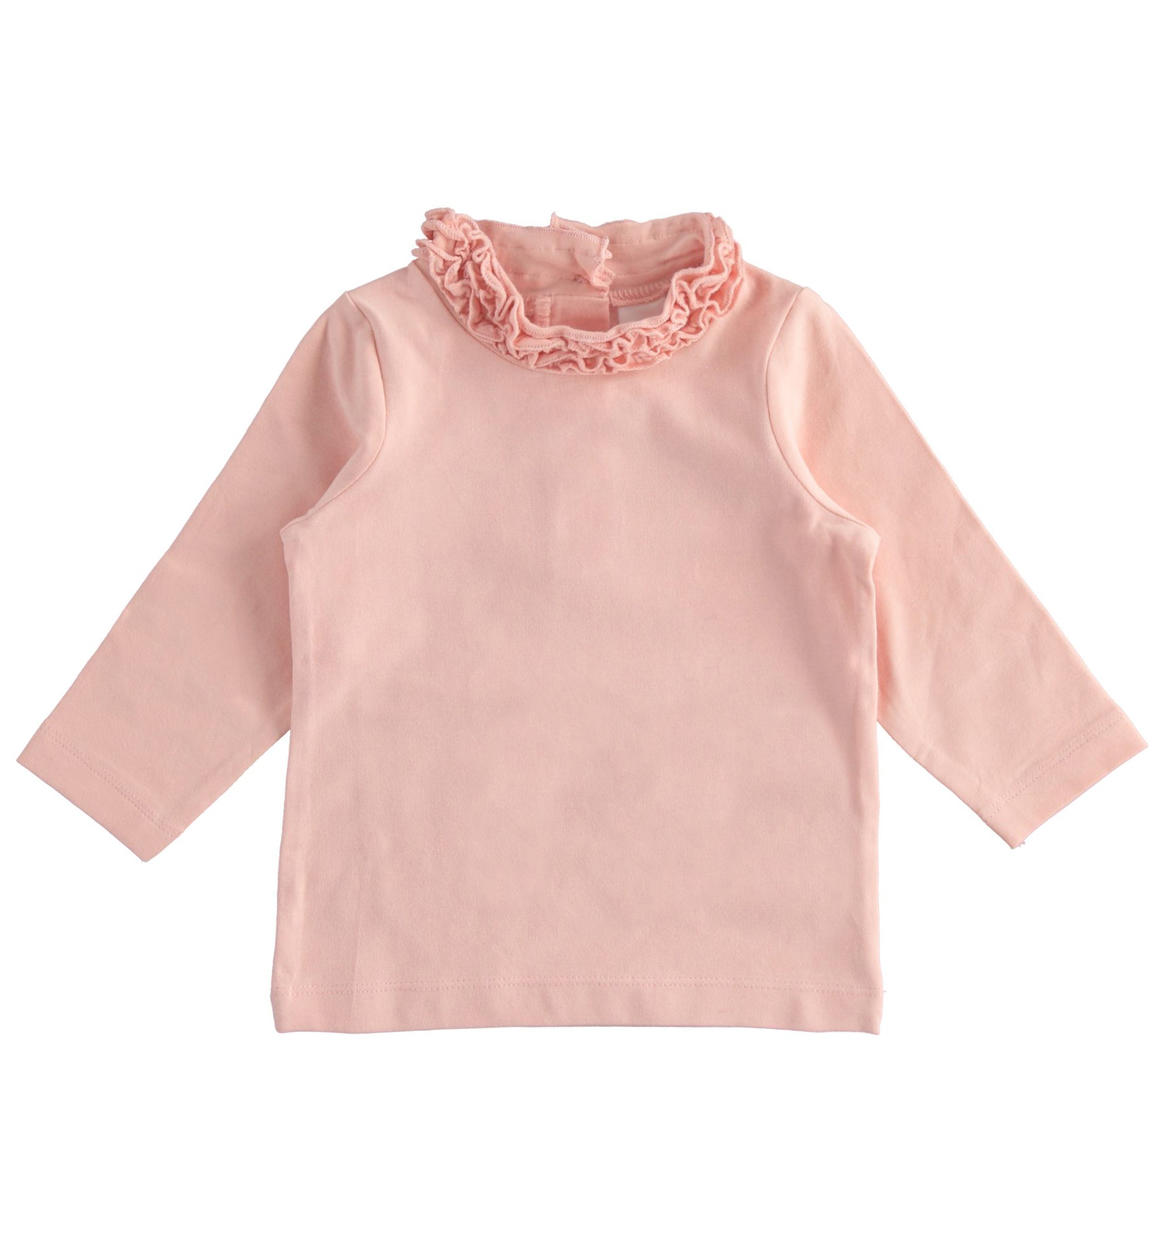 Winter Stretch Cotton T Shirt With Mock Neck For Girl From 6 Months To 7 Years Ido Ido Ido